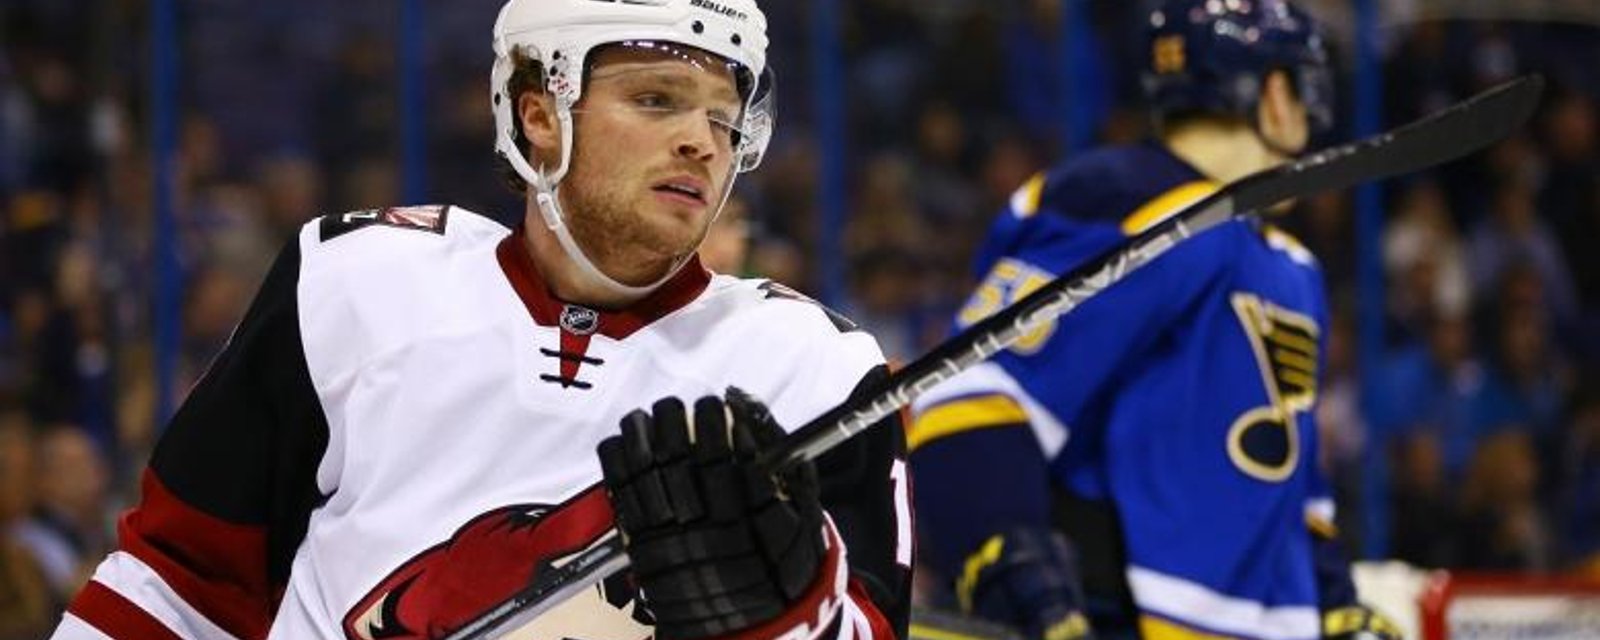 Max Domi absolutely loses it after star teammate takes hit.